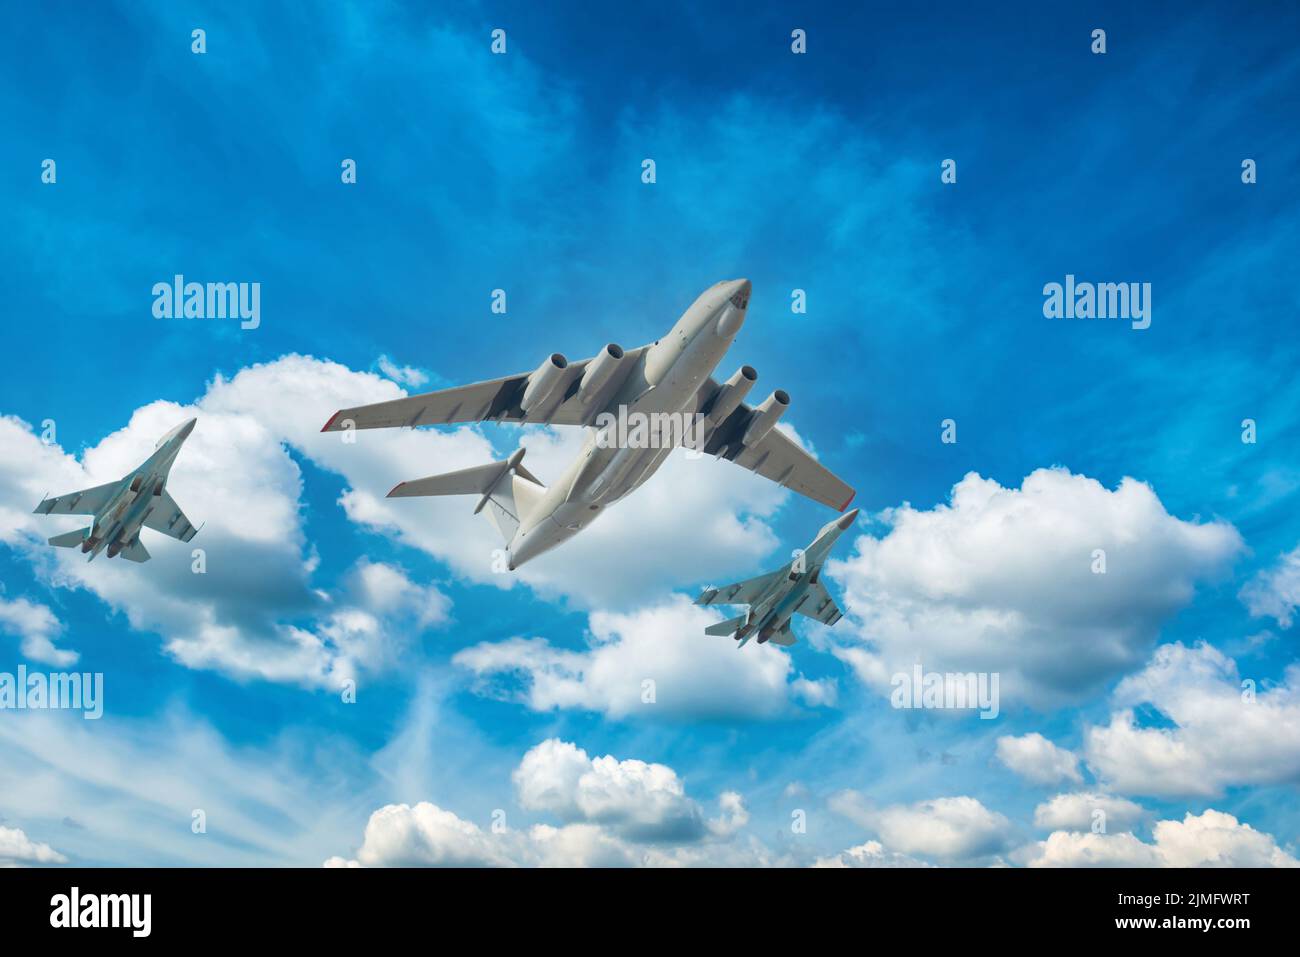 Military jets flying in sky Stock Photo